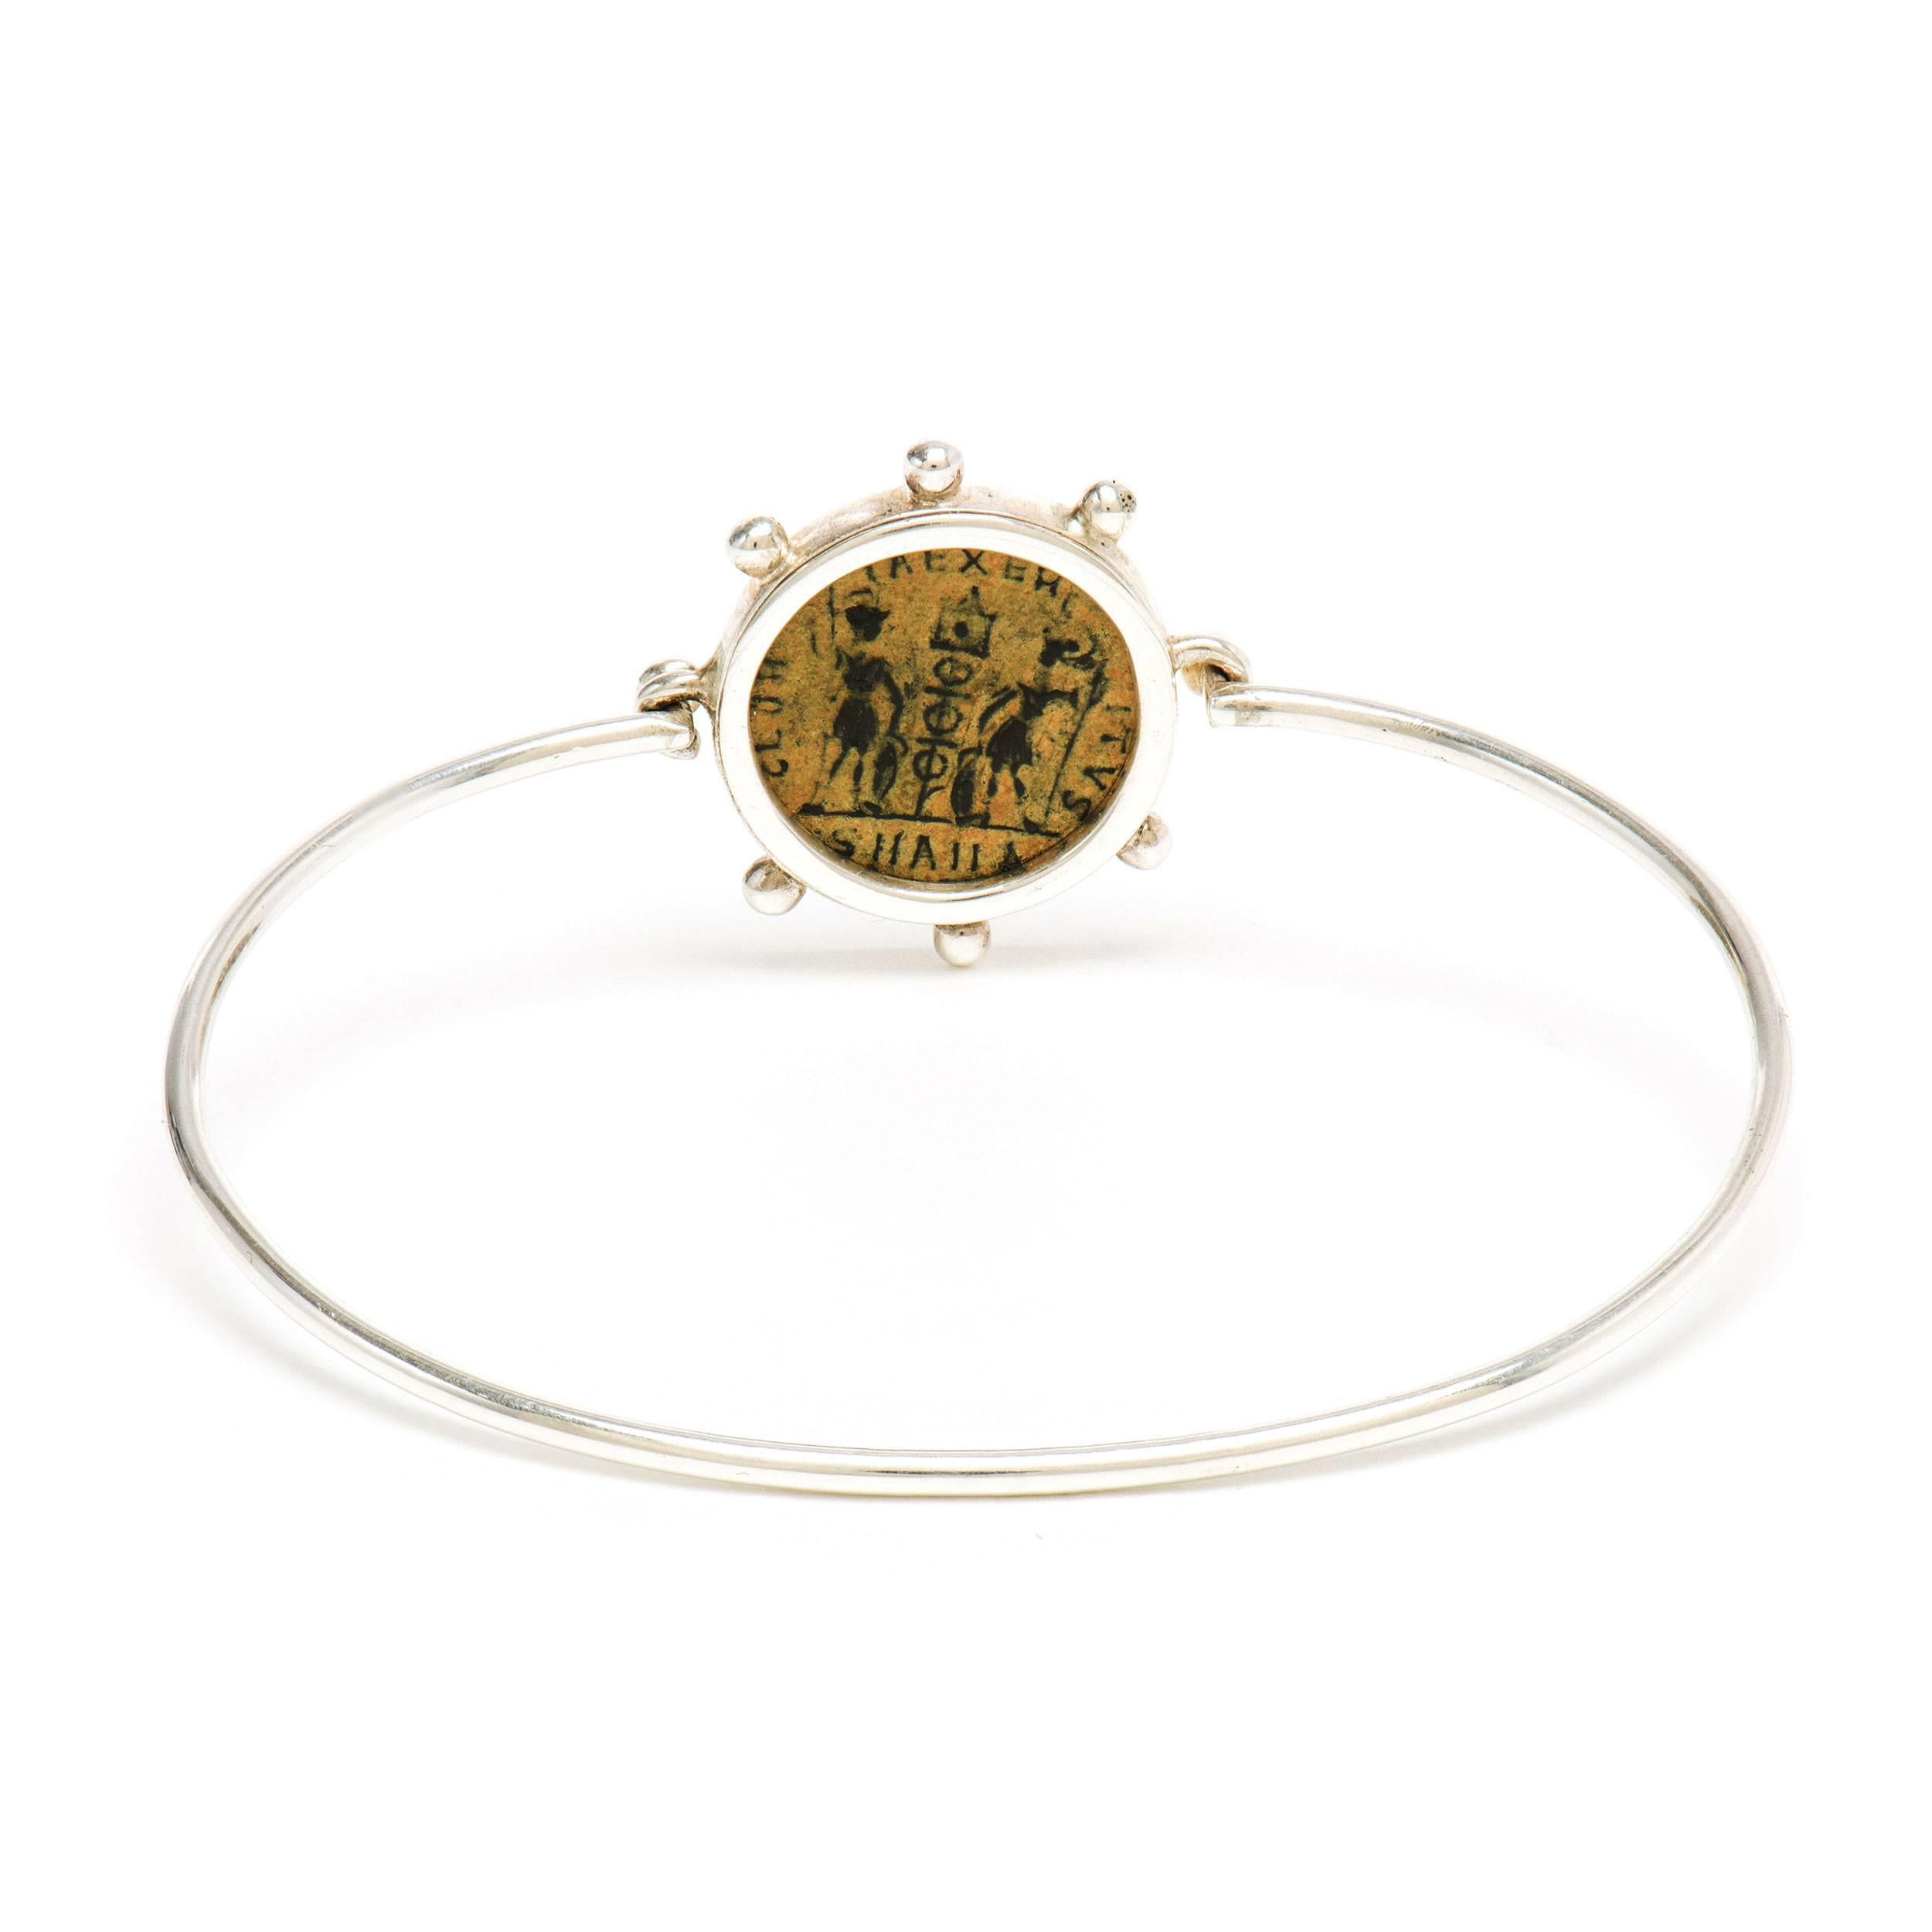 This DUBINI coin bracelet from the 'Empires' collection features an authentic Roman bronze coin set in sterling silver.

* Due to the unique process of hand carving coins in ancient times, there may be a few stylistic differences from the image